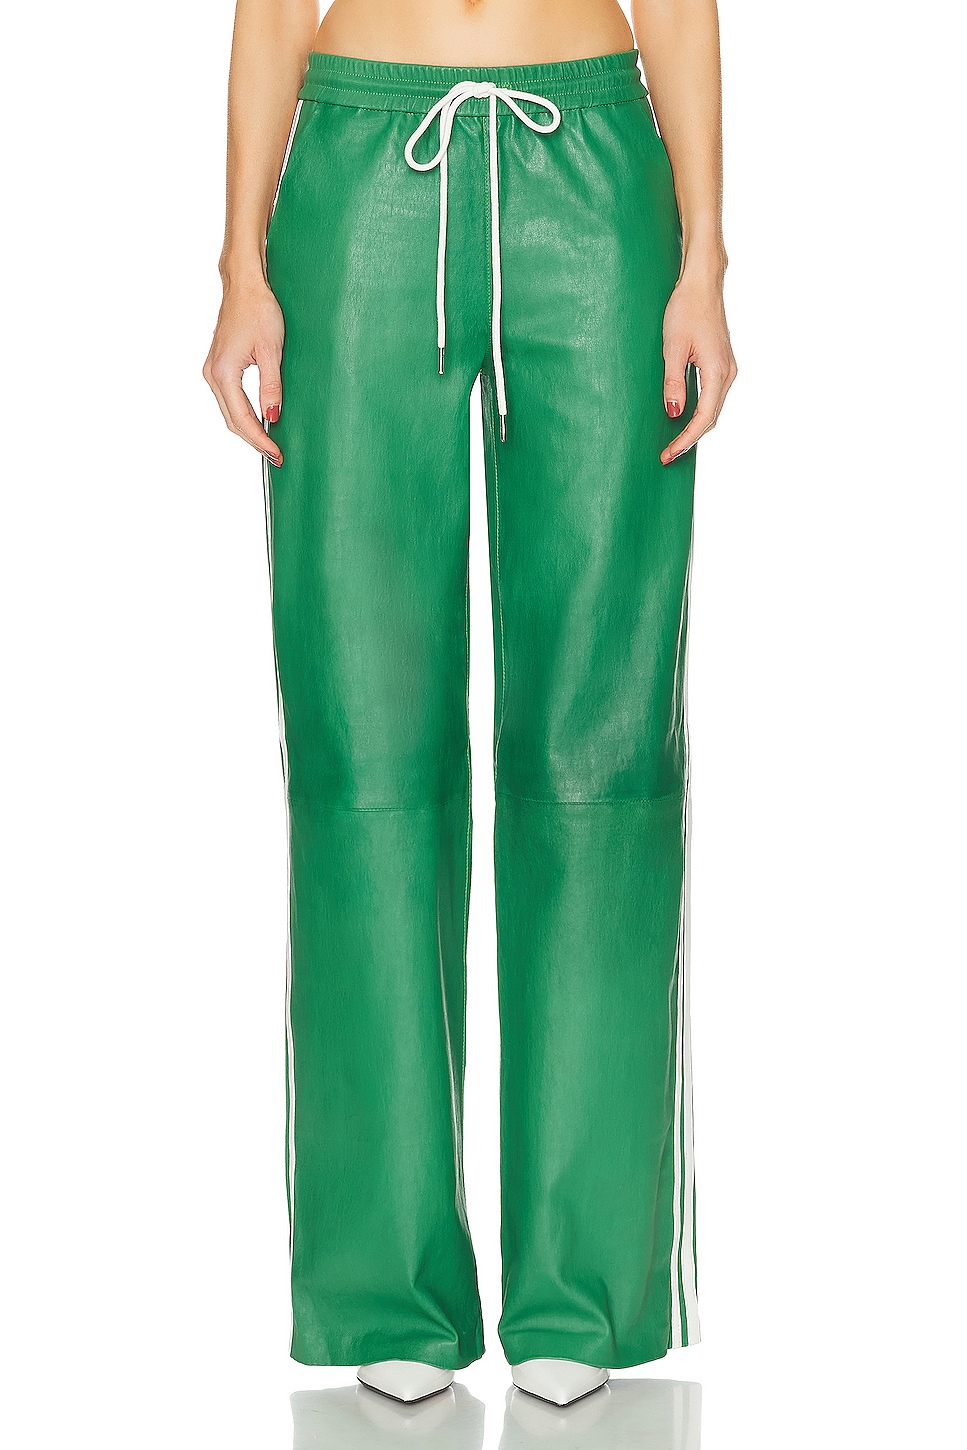 Baggy Athletic Sweatpant in Green